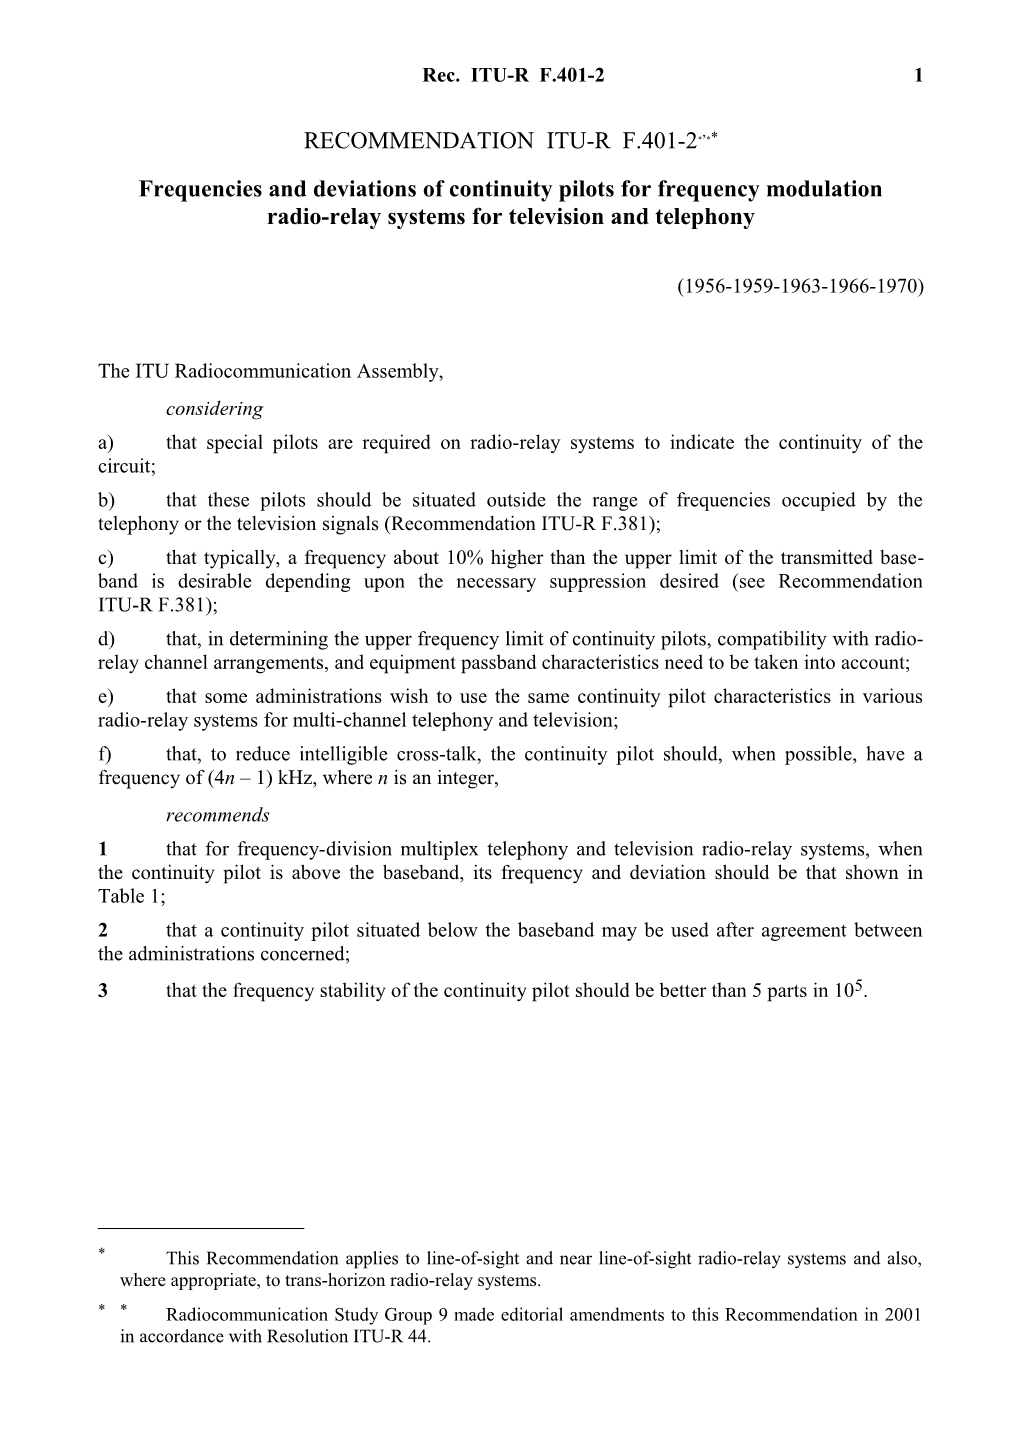 RECOMMENDATION ITU-R F.401-2*, - Frequencies and Deviations of Continuity Pilots for Frequency